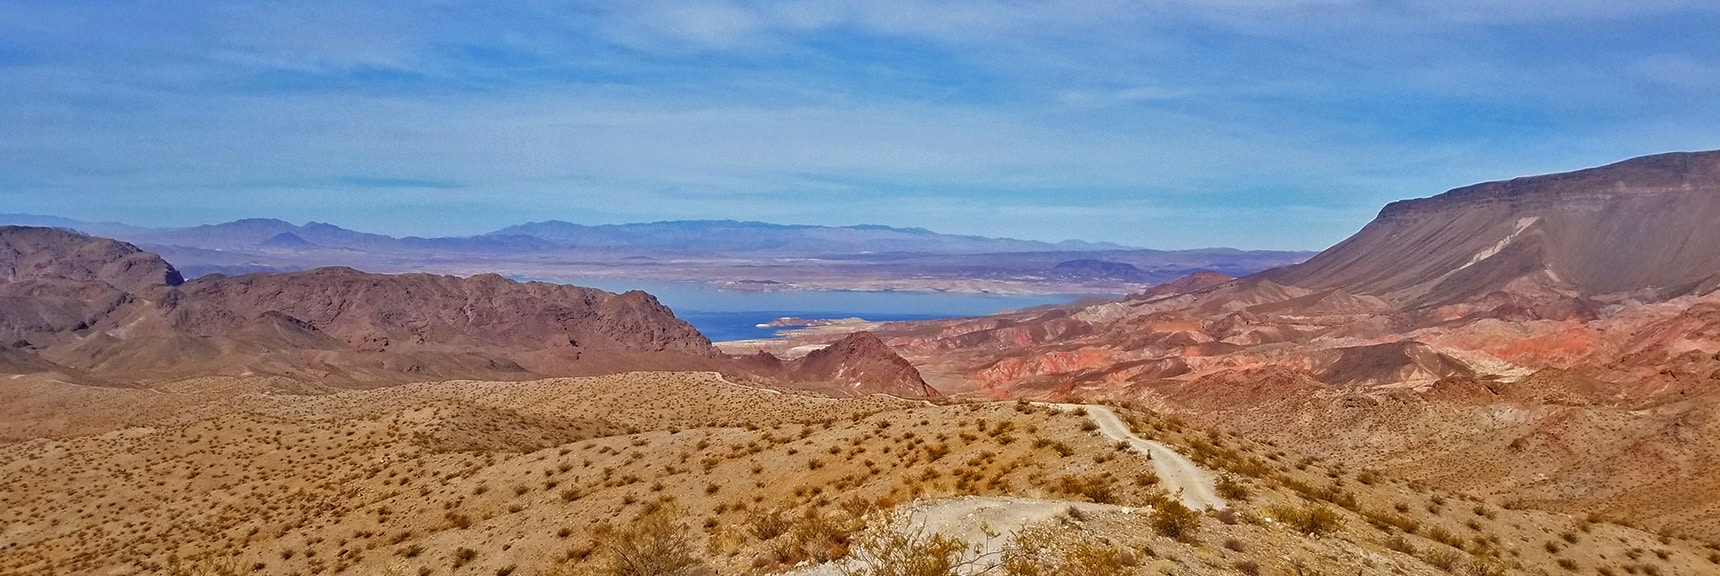 Lake Mead Viewed from High Point on North Mine Access Road | Kingman Wash Access Road | Lake Mead National Recreation Area, Arizona